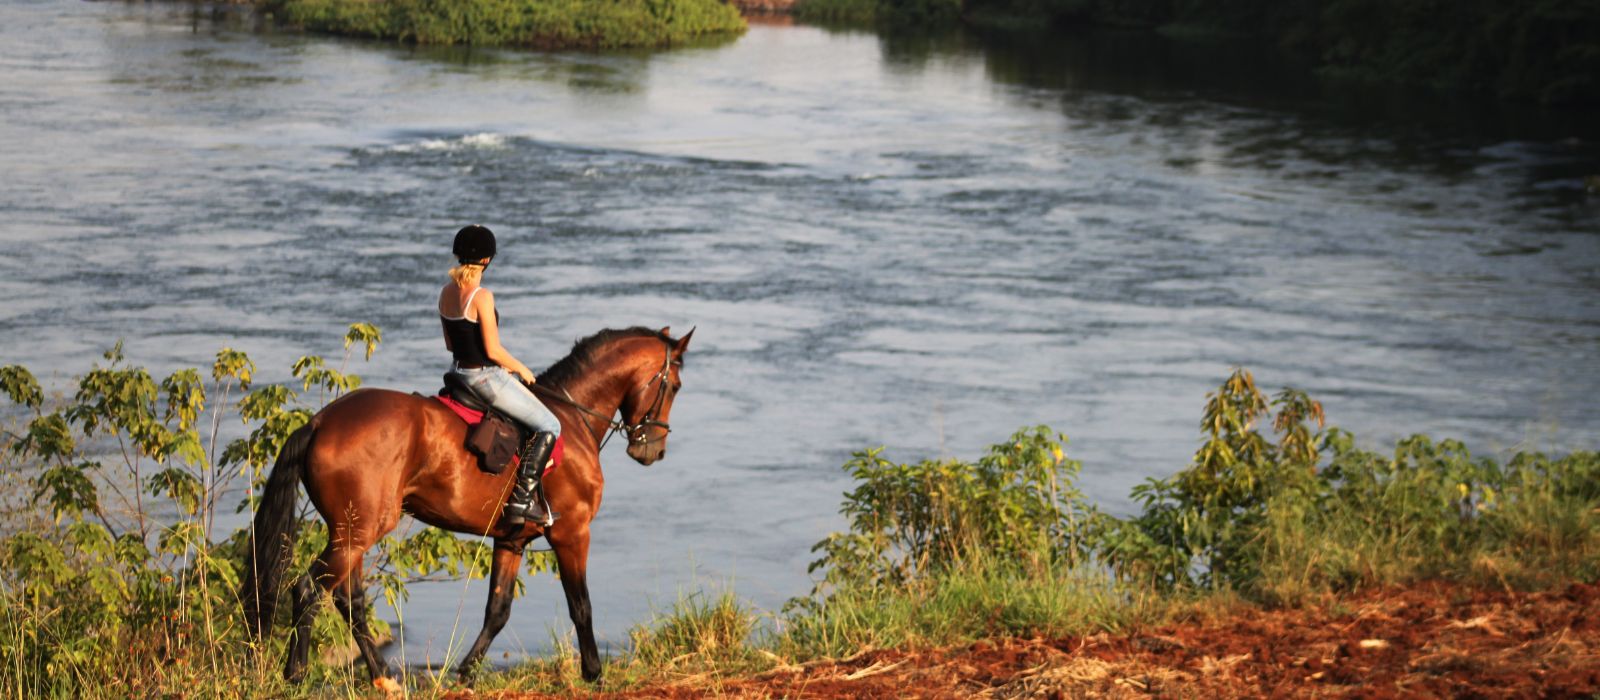 6 Best Safaris for Swimming with Horses in Africa